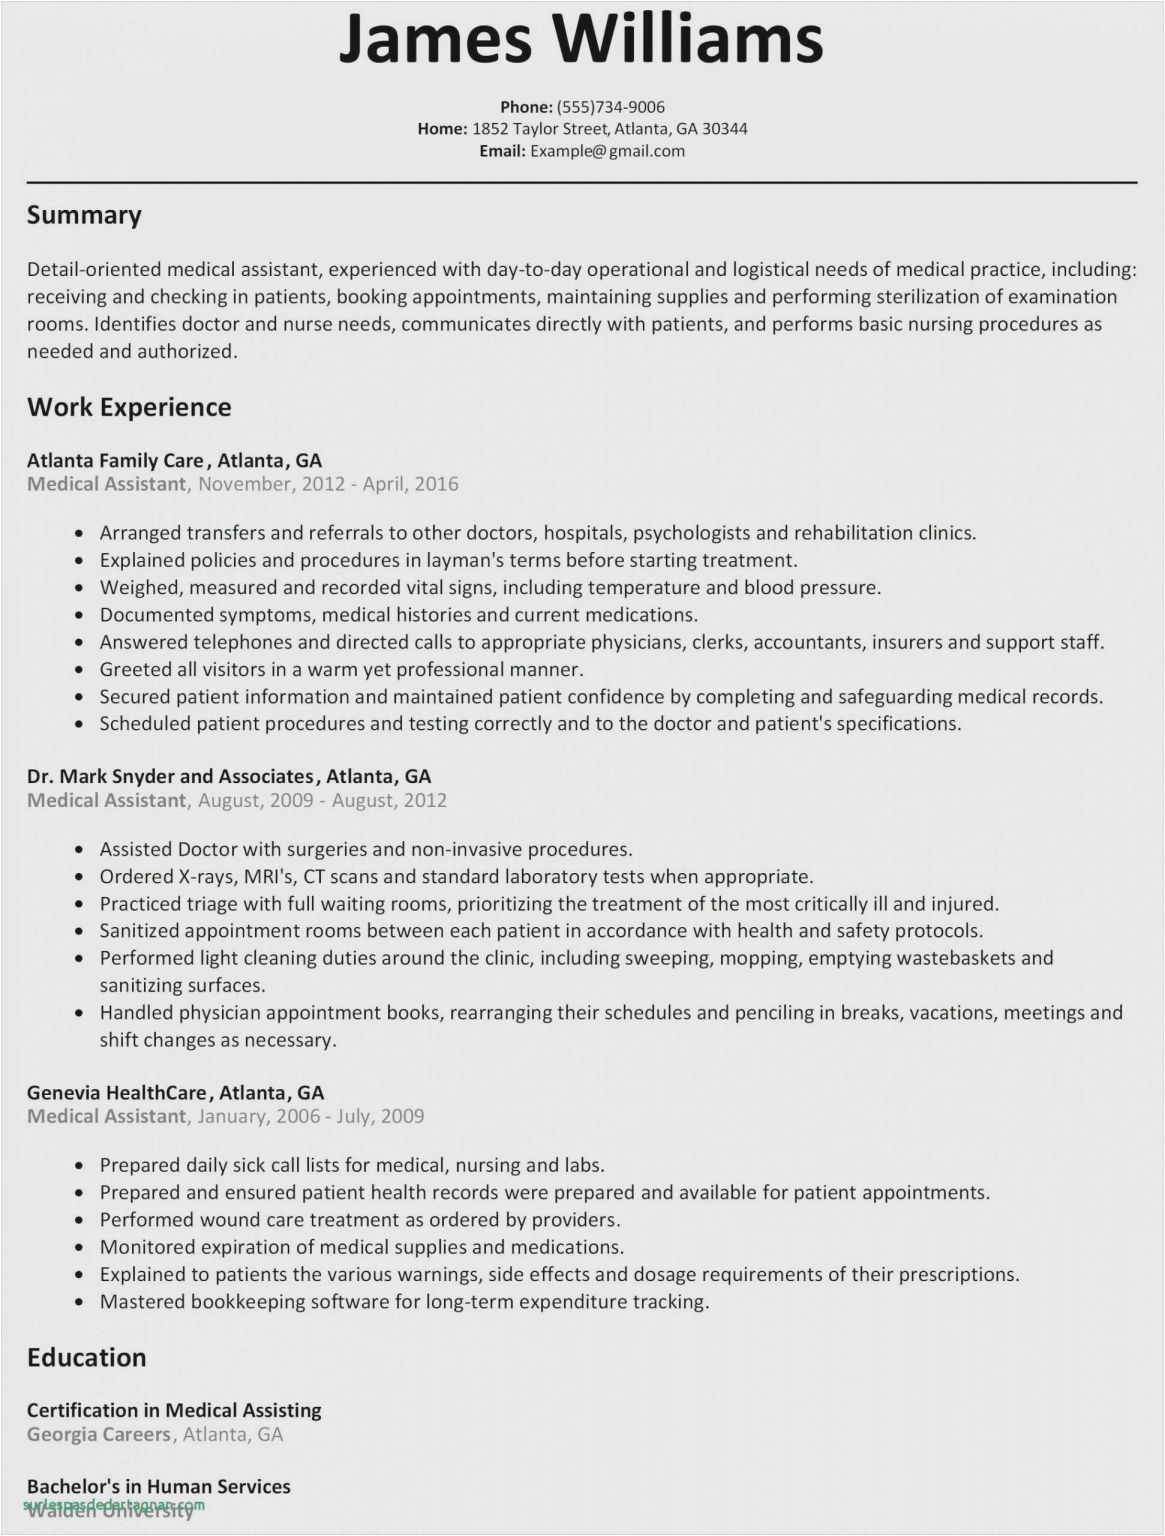 Sample Resume for Nurses without Experience In the Philippines Download 57 Sample Security Guard Resume No Experience